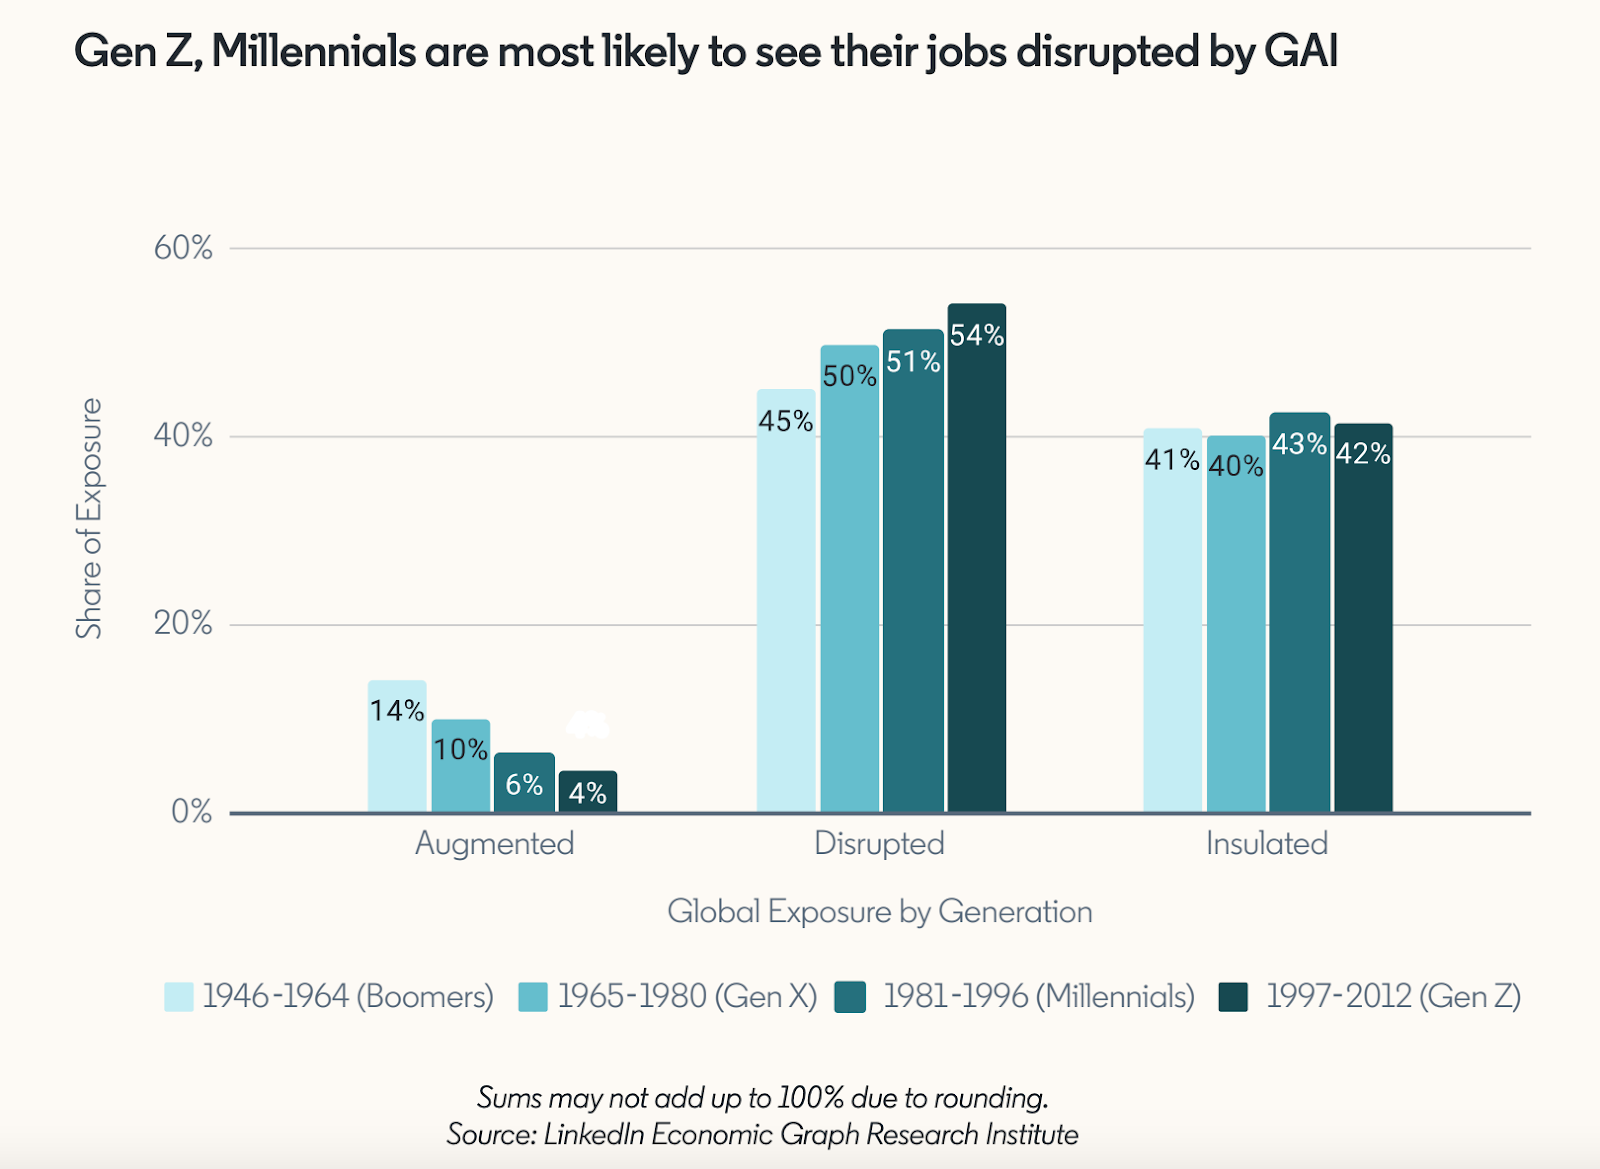 Gen Z, and Millennials are most likely to see jobs disrupted by GAI 